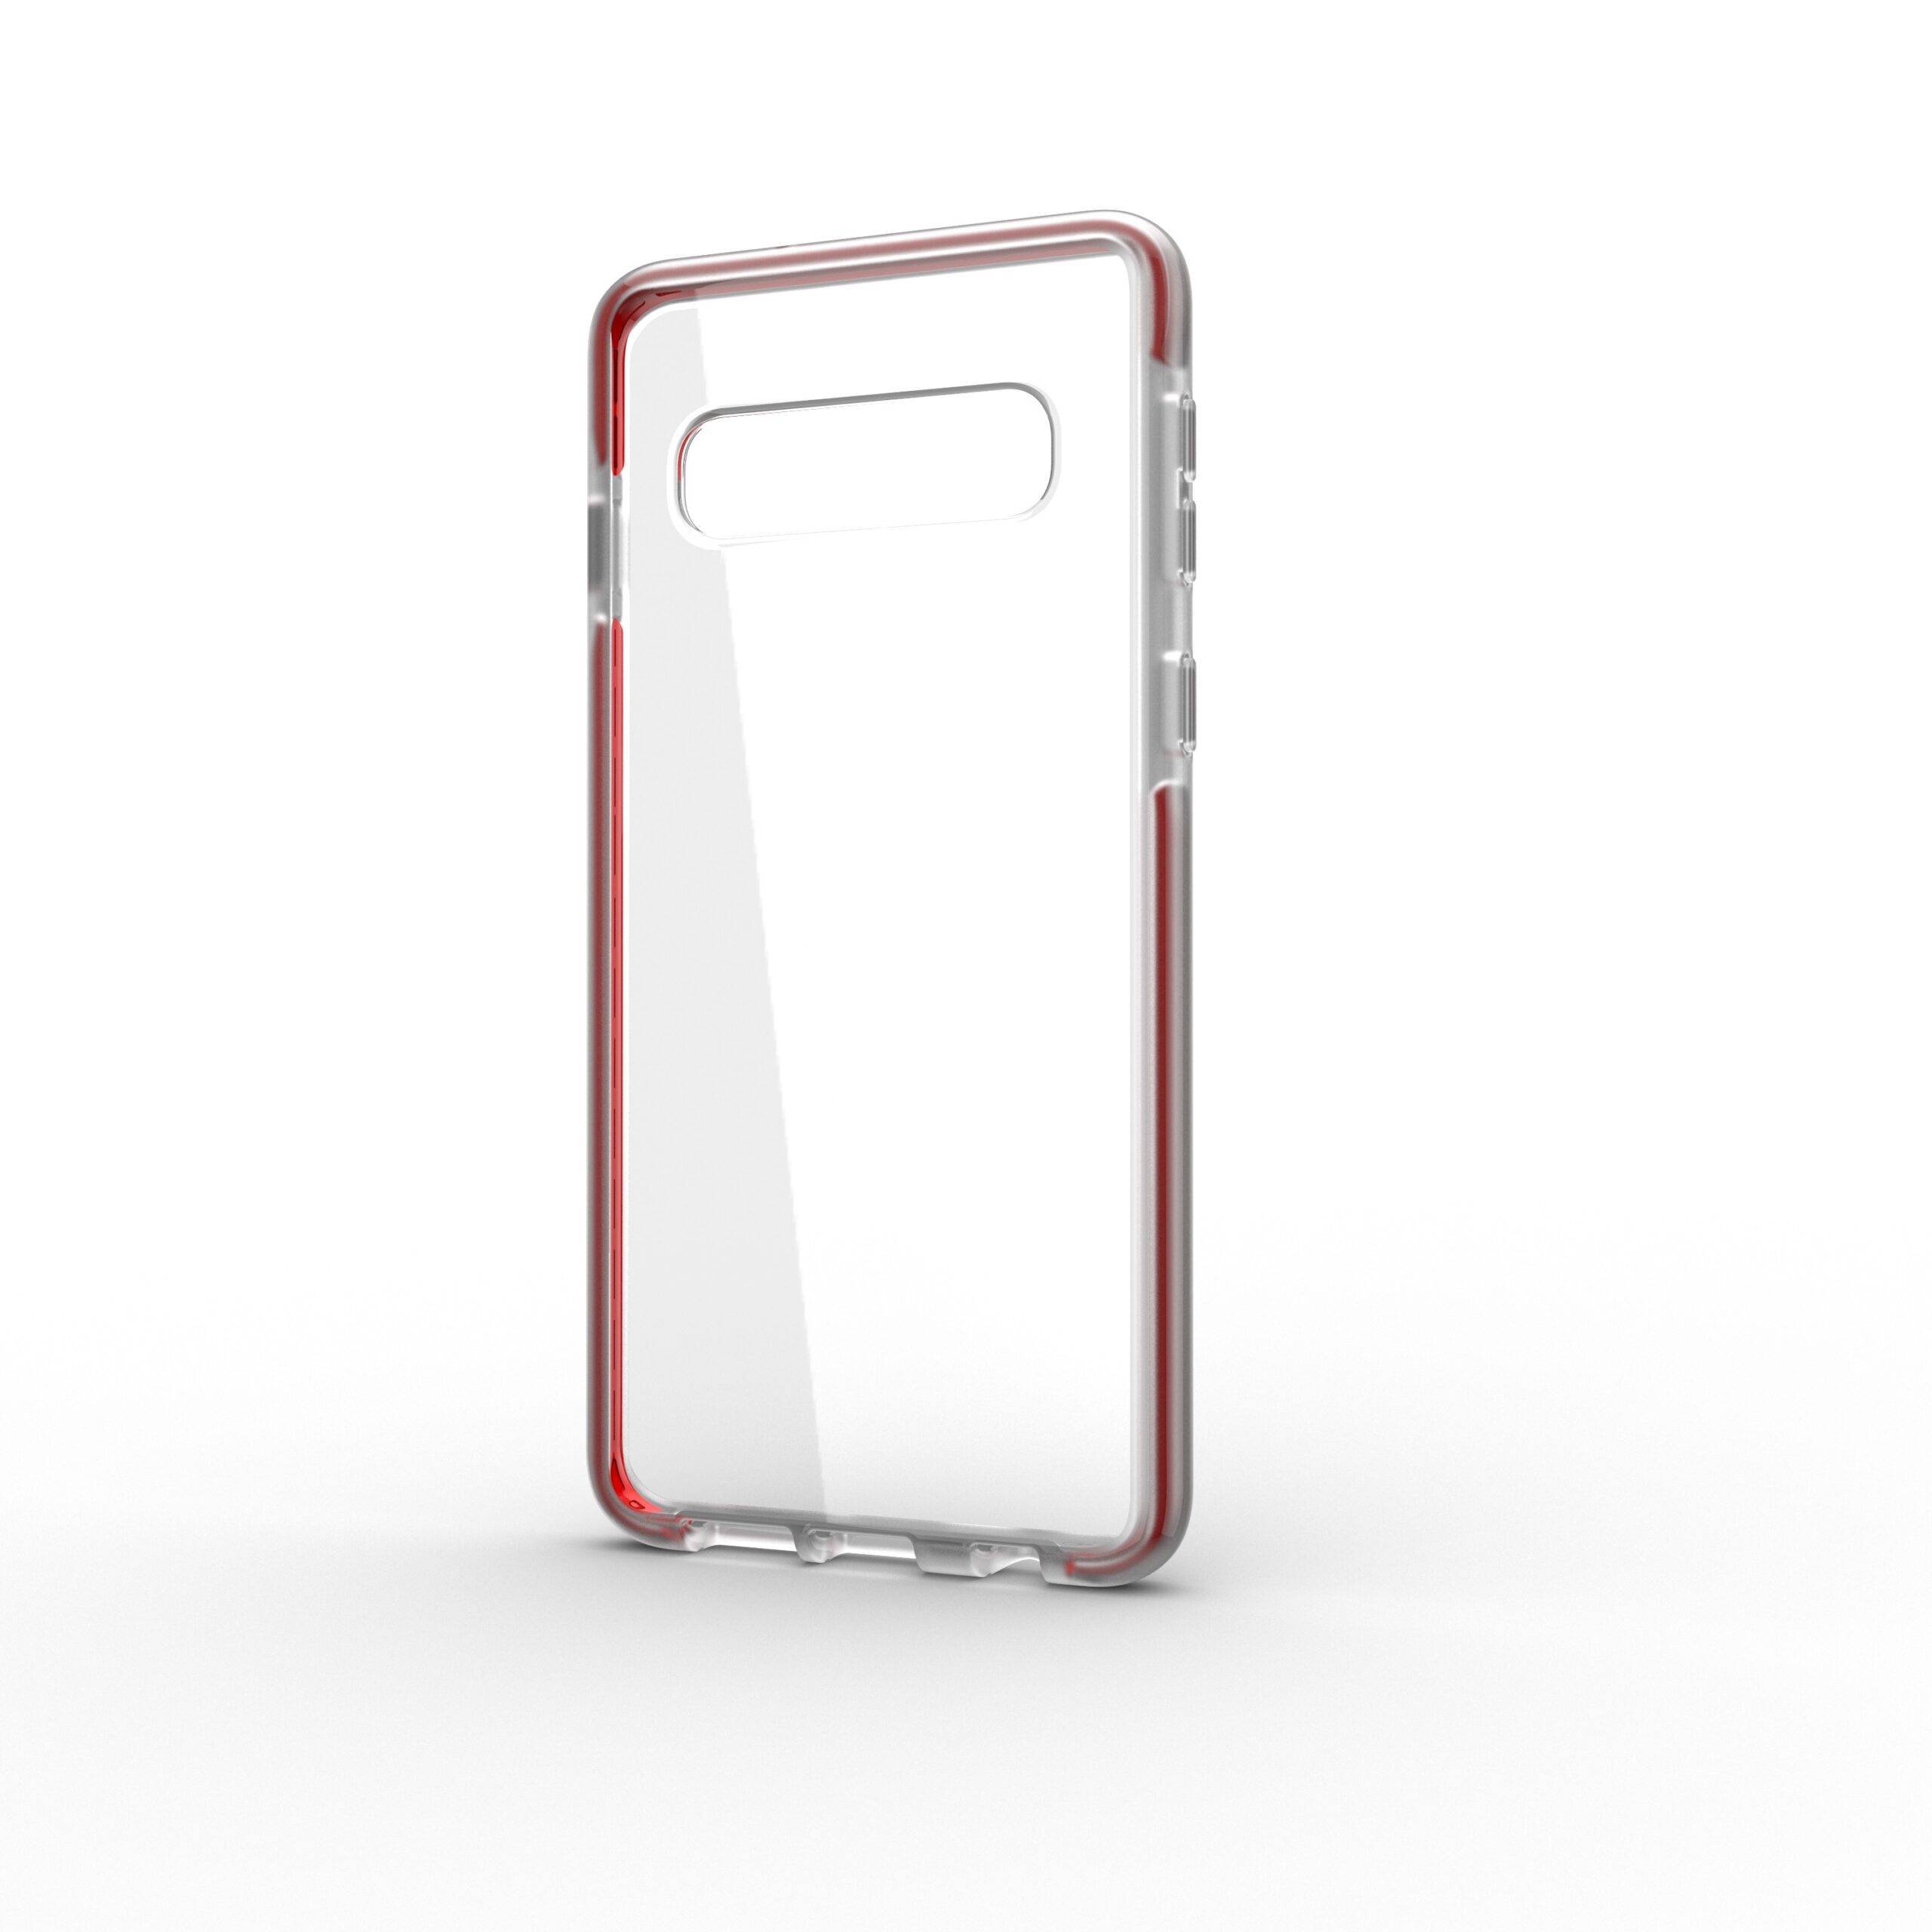 Base BorderLine - Dual Border Impact Protection for Samsung Galaxy S10 Plus - Red